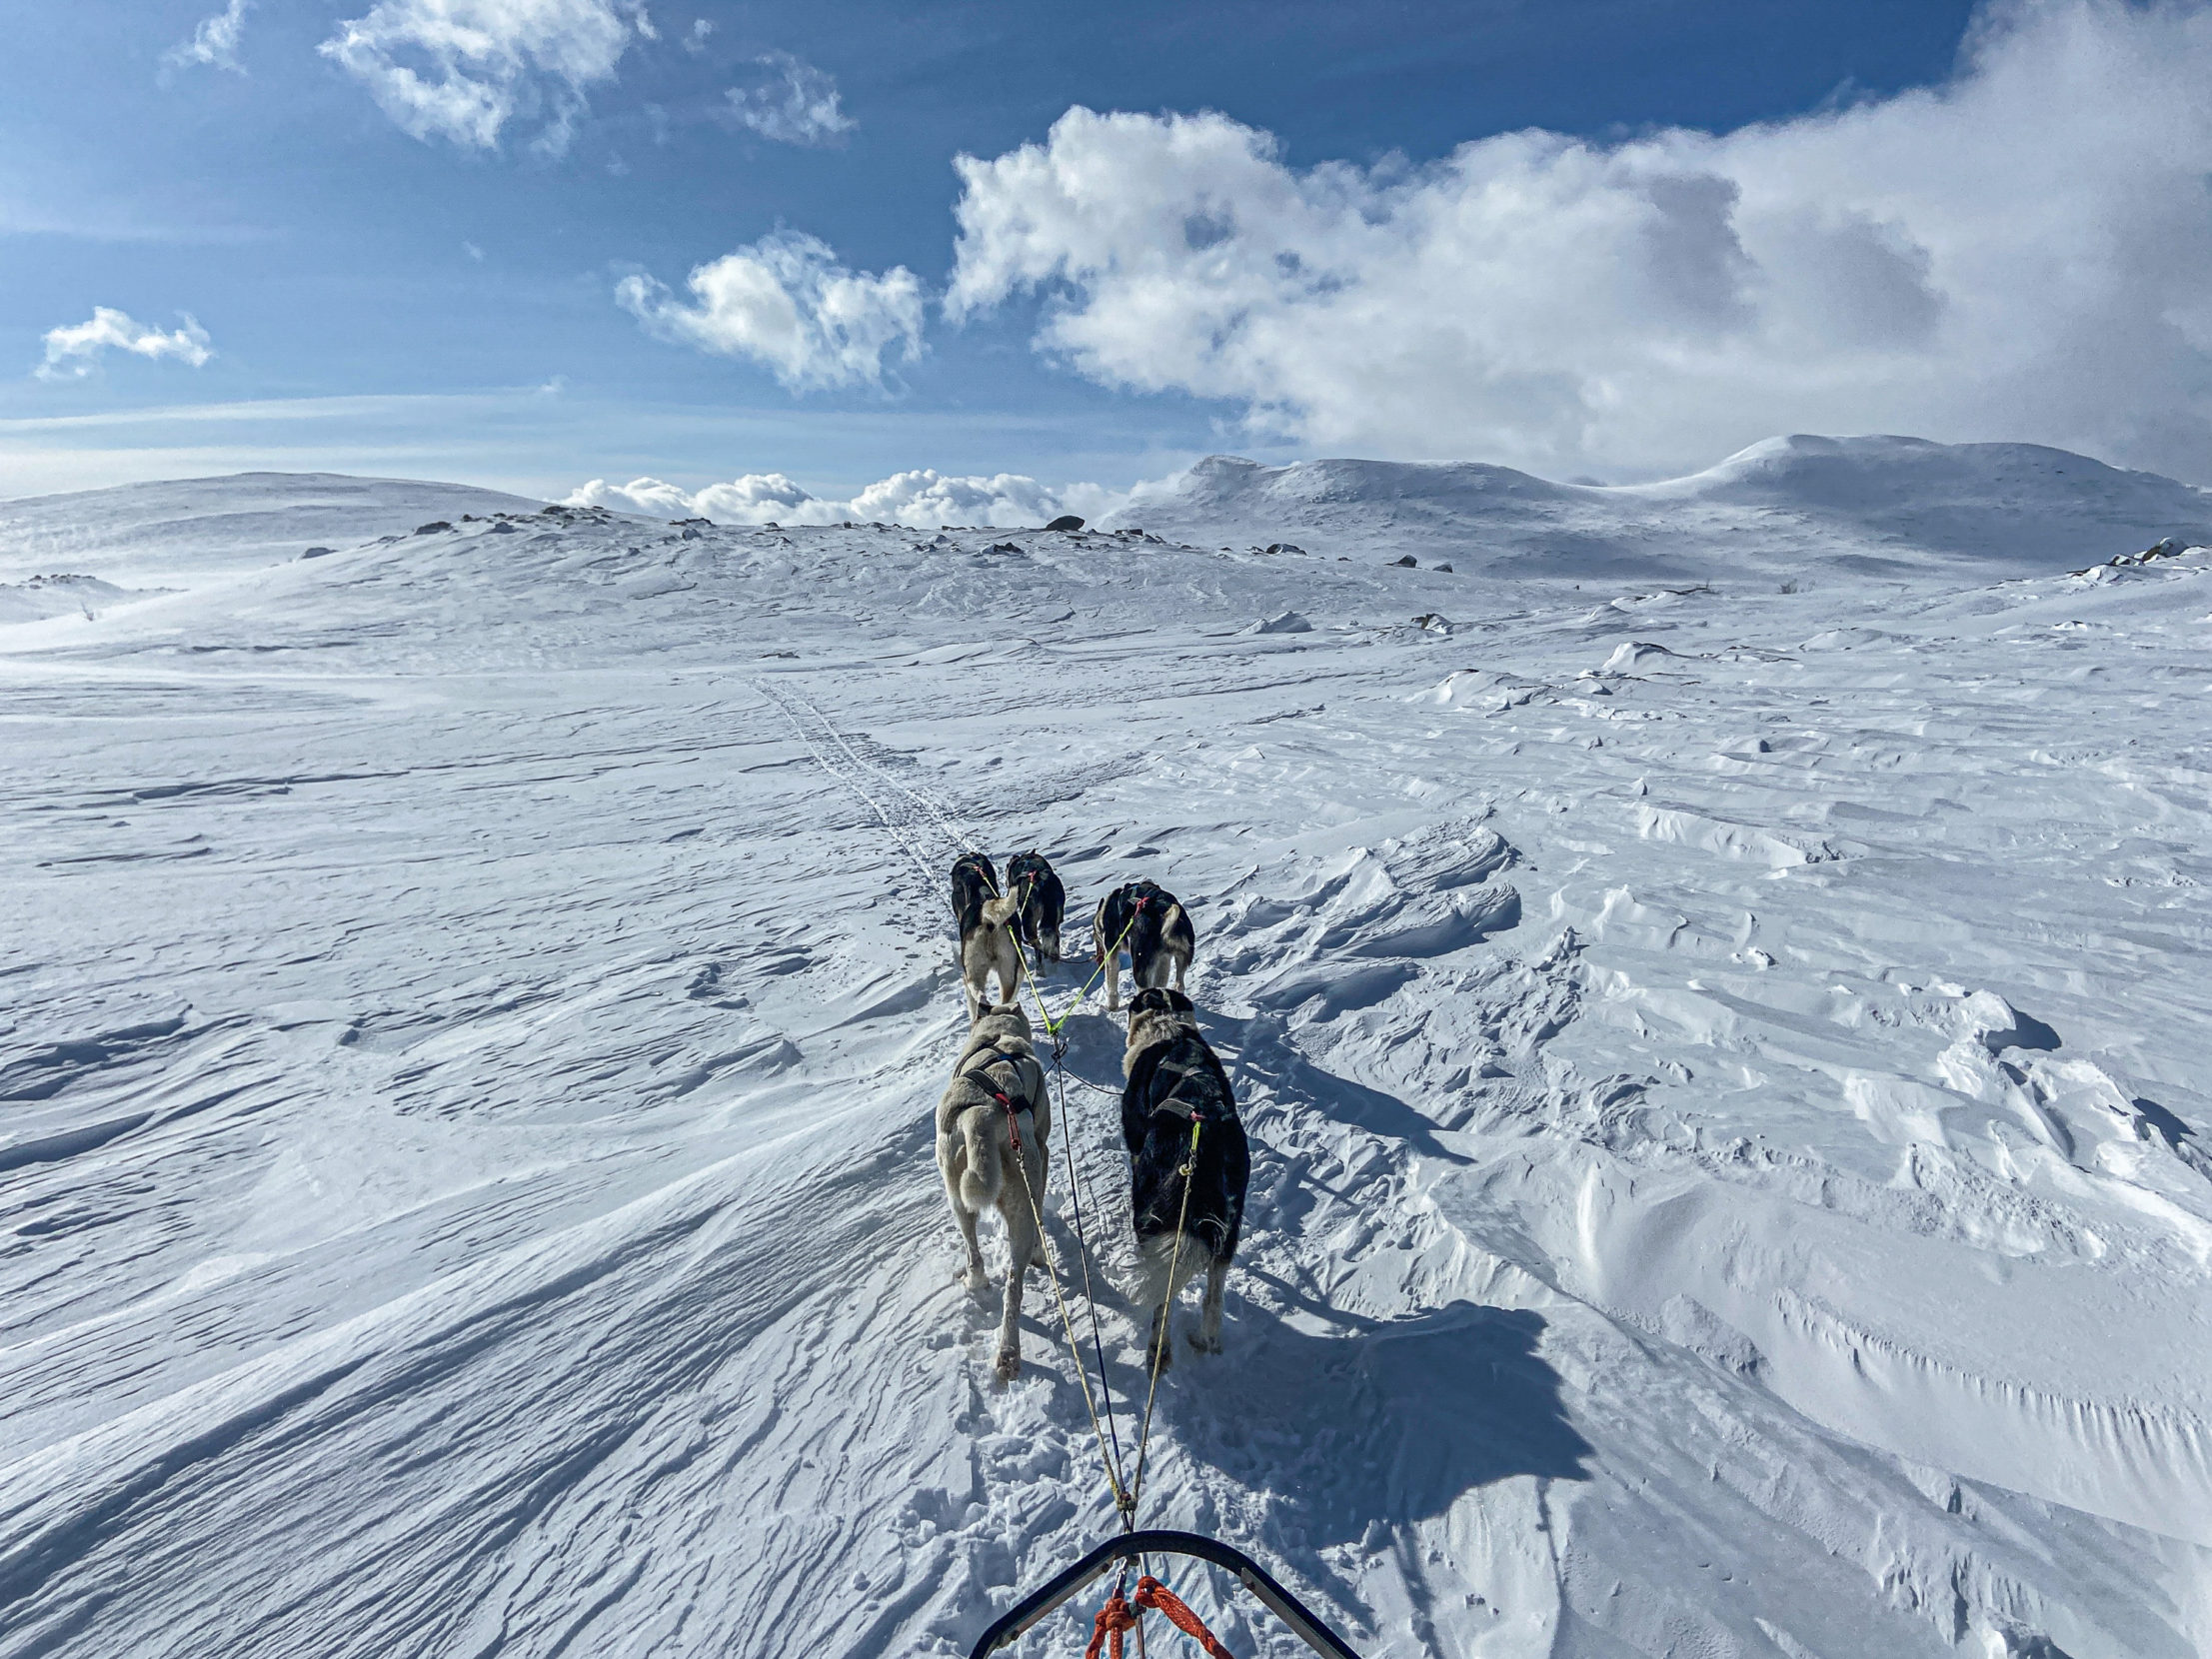 Venturing high into the mountains behind a team of sled dogs gives van Rijn a natural high — and leads the conflict journalist to a rare sense of peace. Photo: Edmée van Rijn.